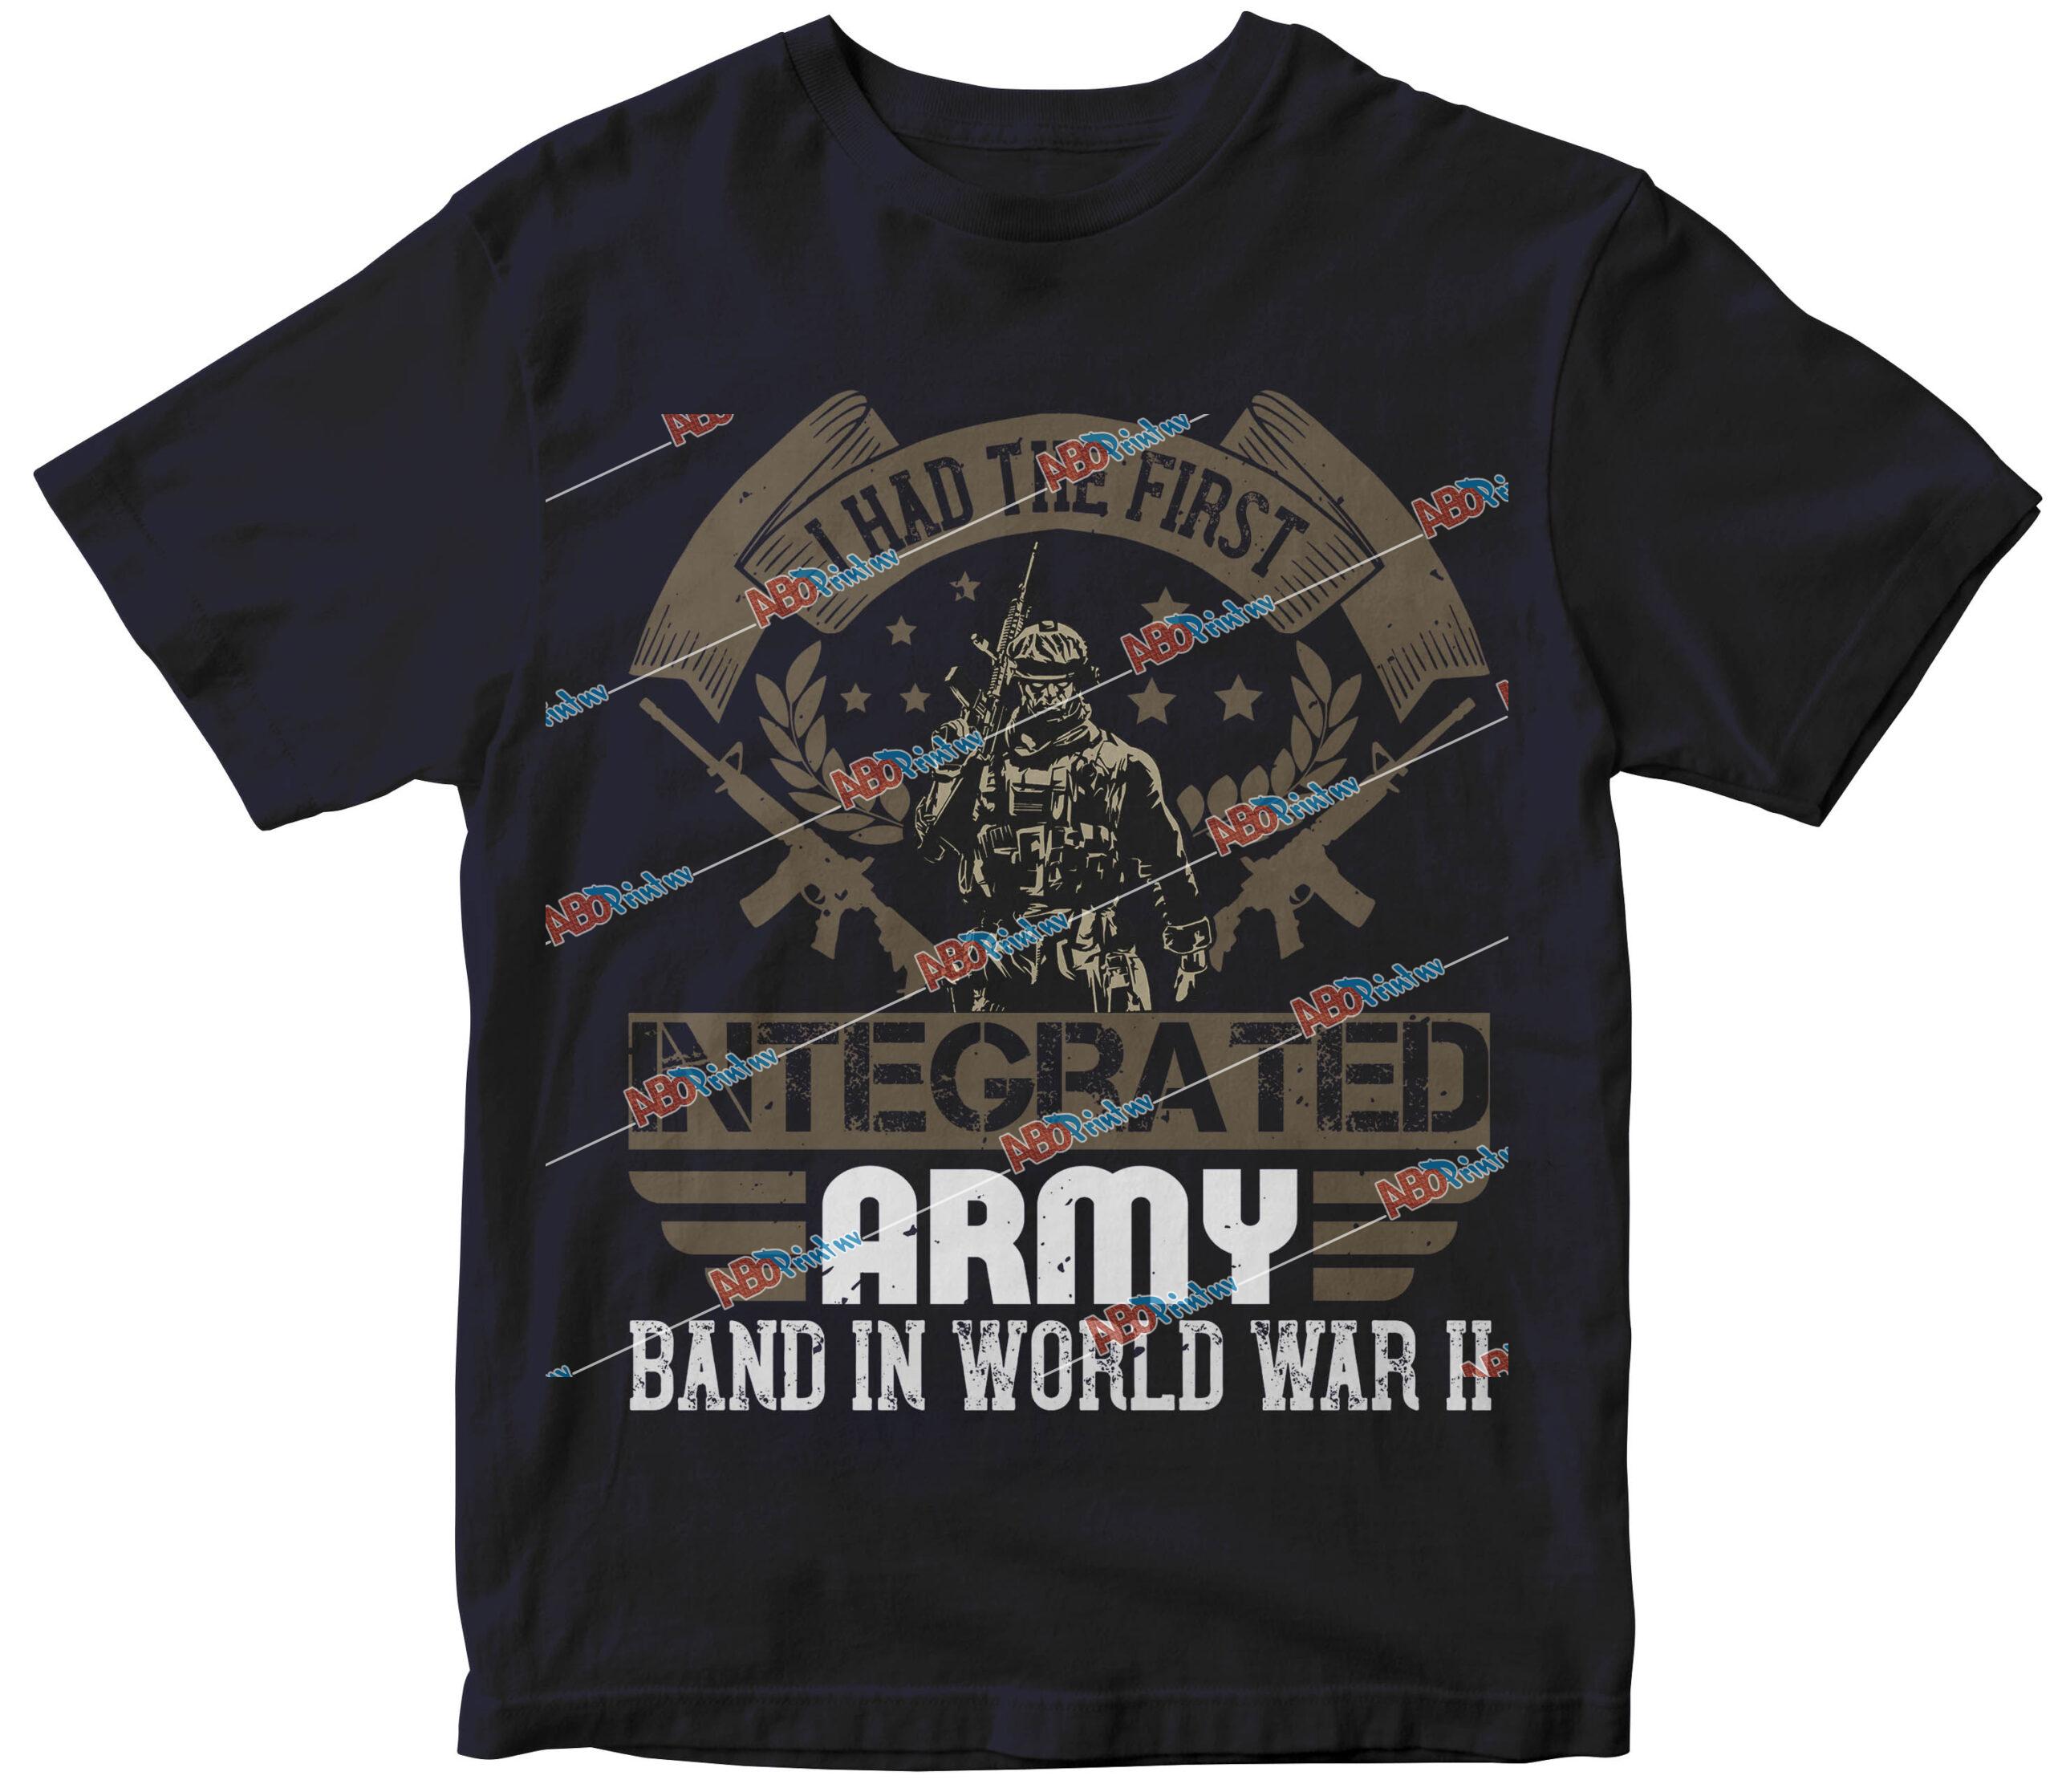 I had the first integrated Army band in World War II.jpg